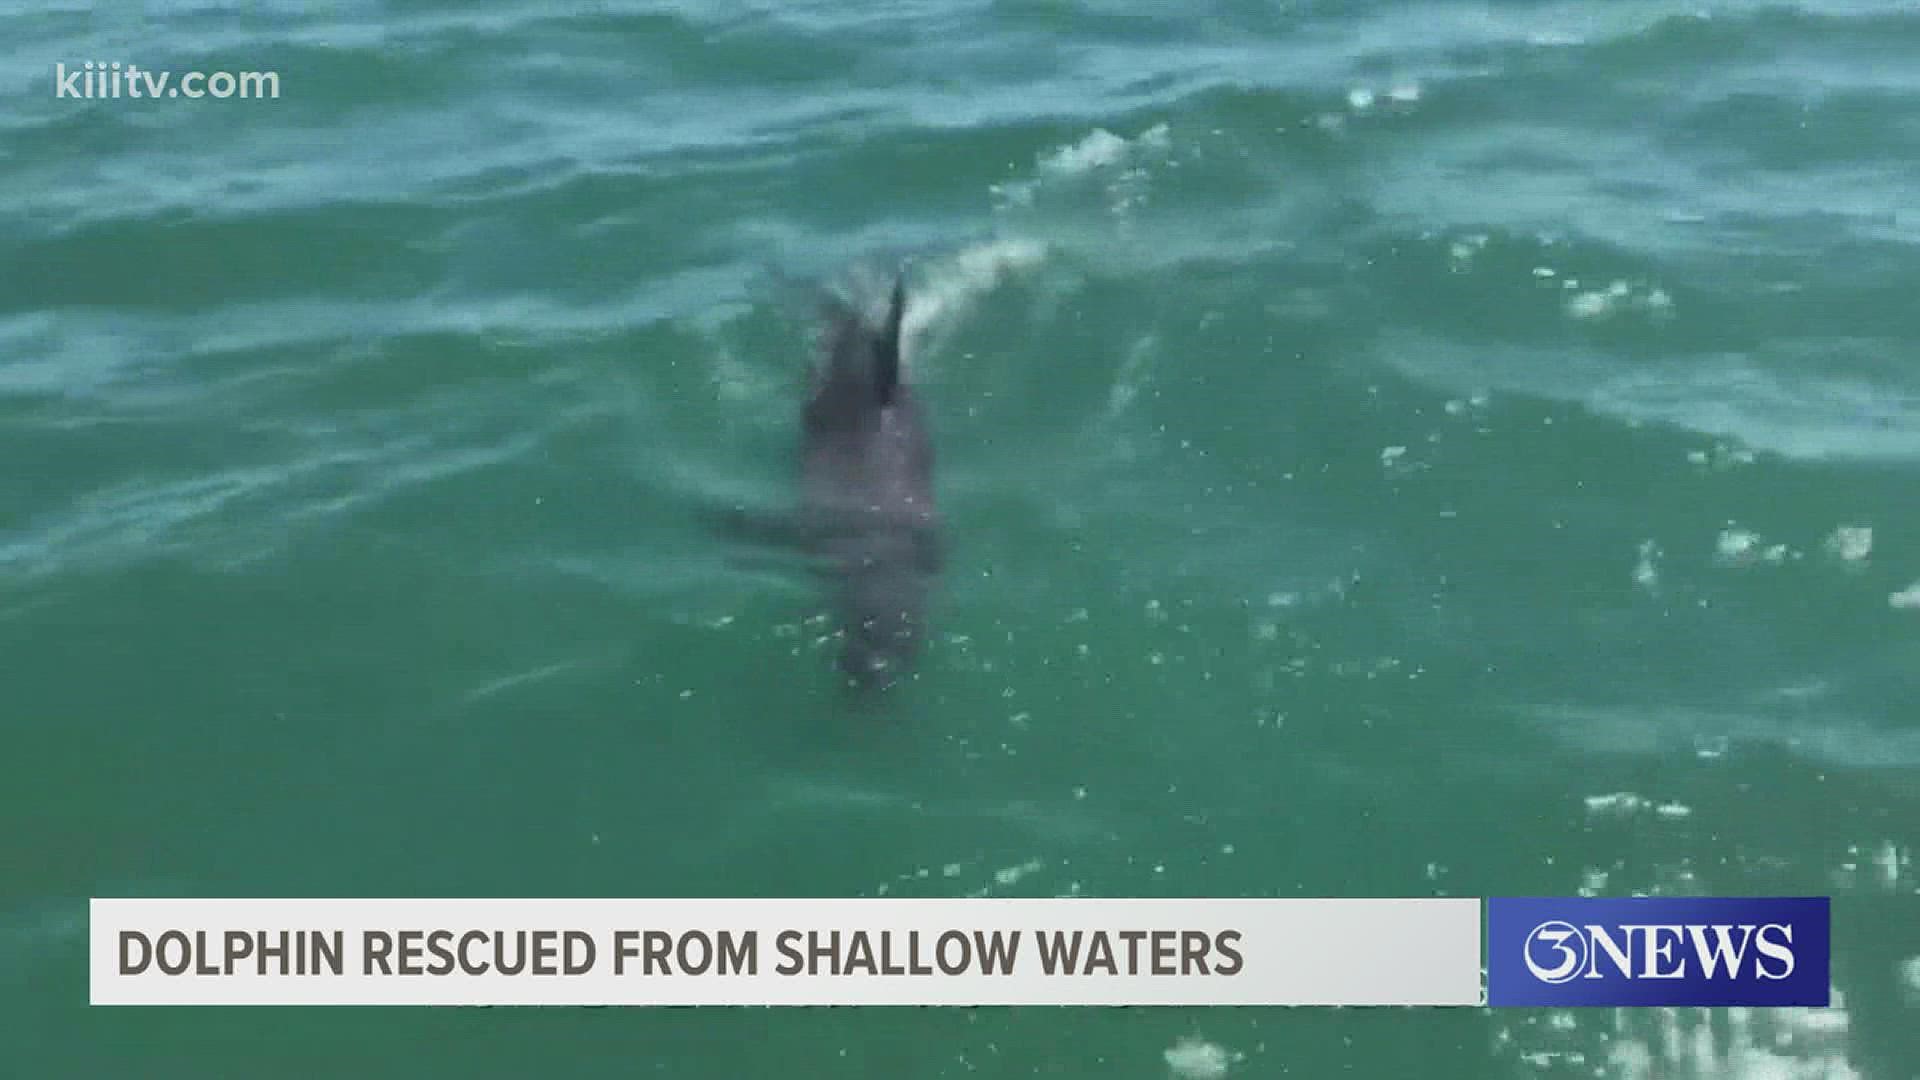 More than 20 people rushed to help after the dolphin was found swimming in shallow waters in Lighthouse Lakes near Port Aransas, Texas.